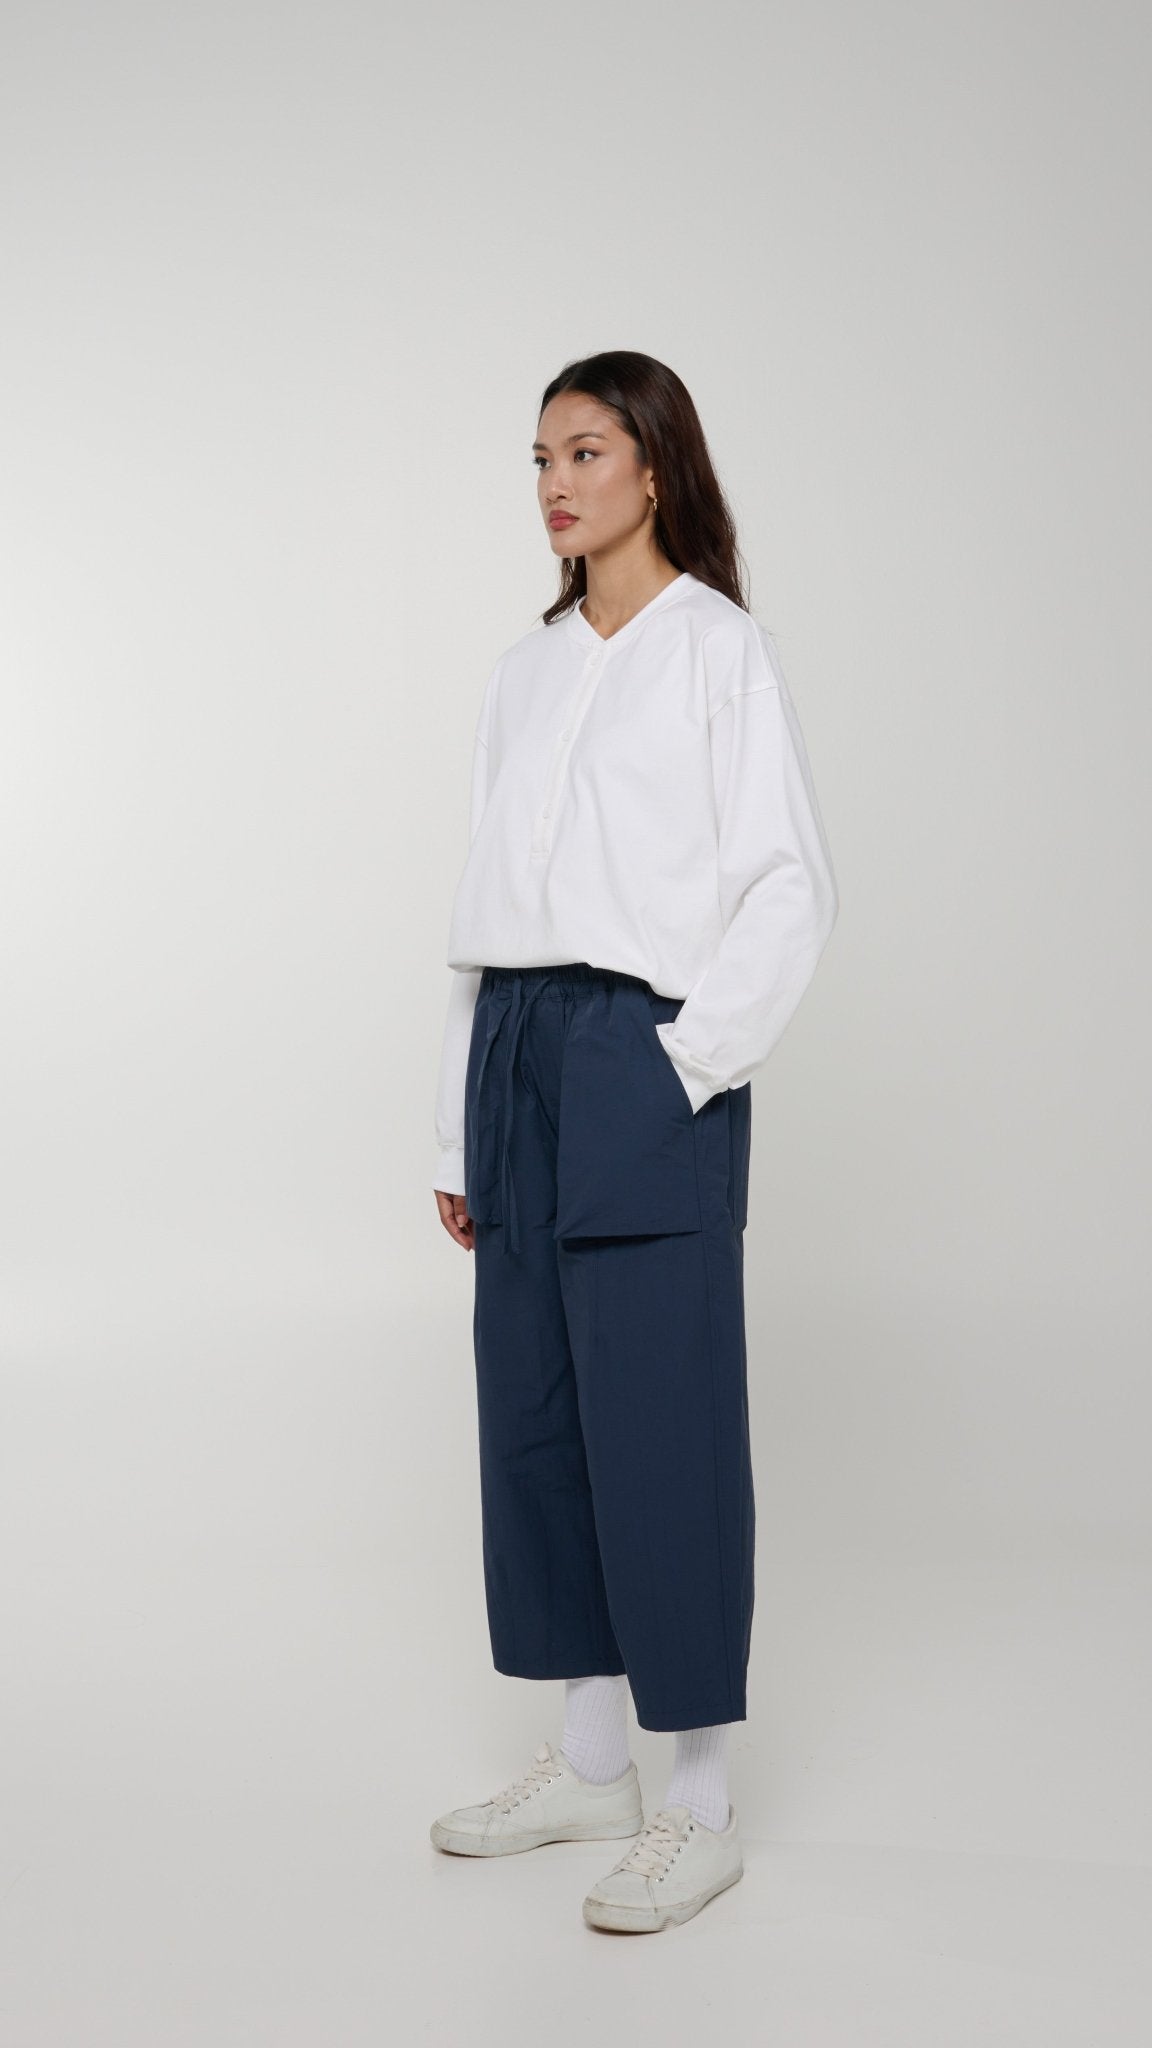 GRAYE Singapore Unisex Apparel - Relaxed Elasticated Trousers - Navy